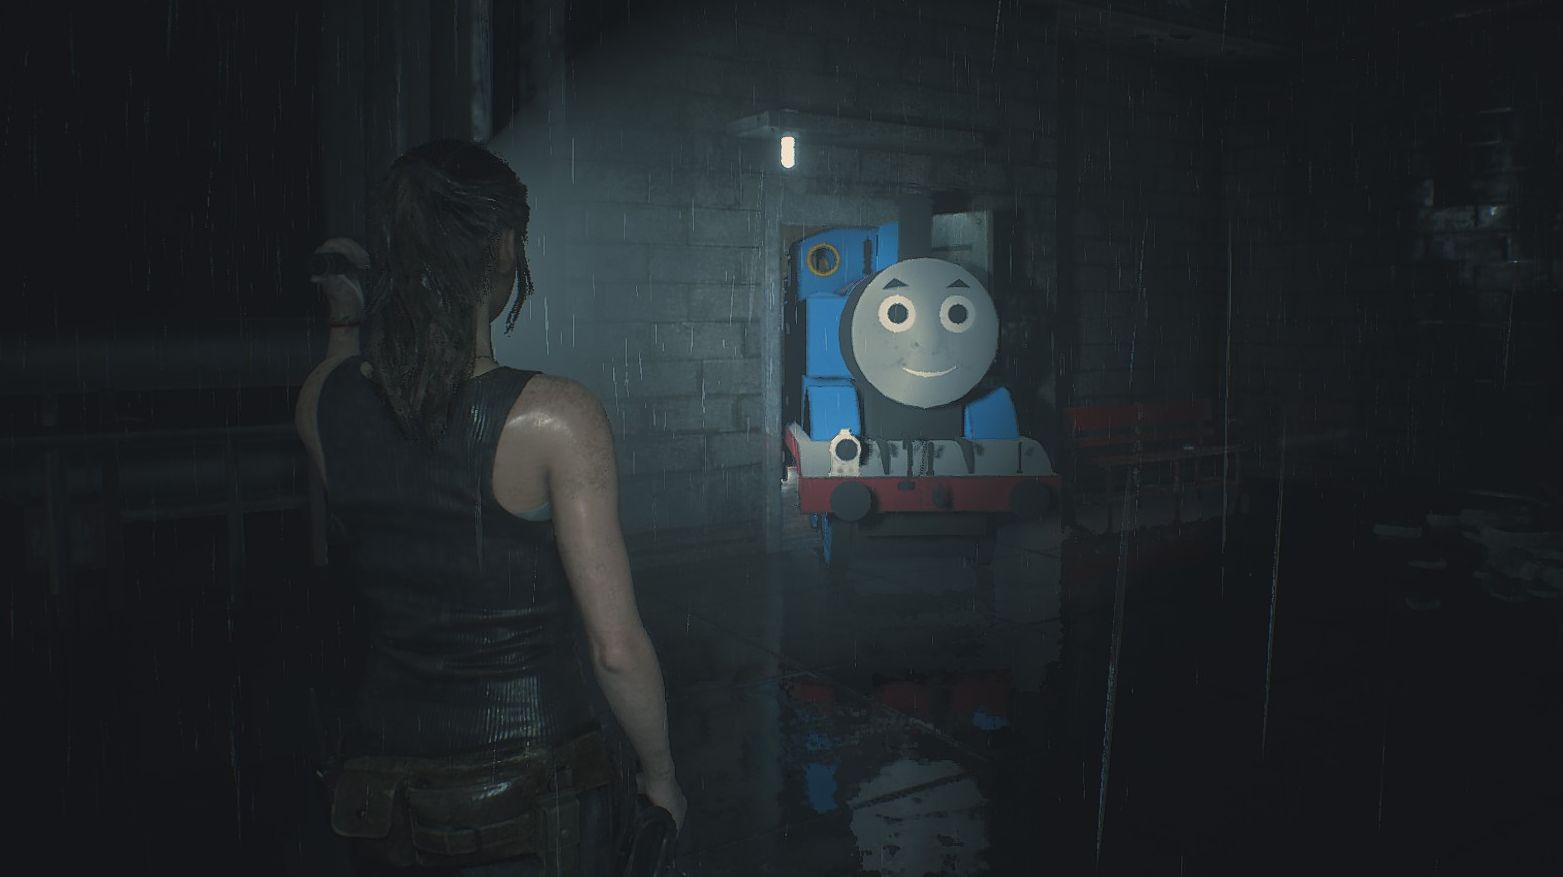 Thomas the Tank Engine advancing in a menacing manner in Resident Evil 2 (courtesy of a mod)